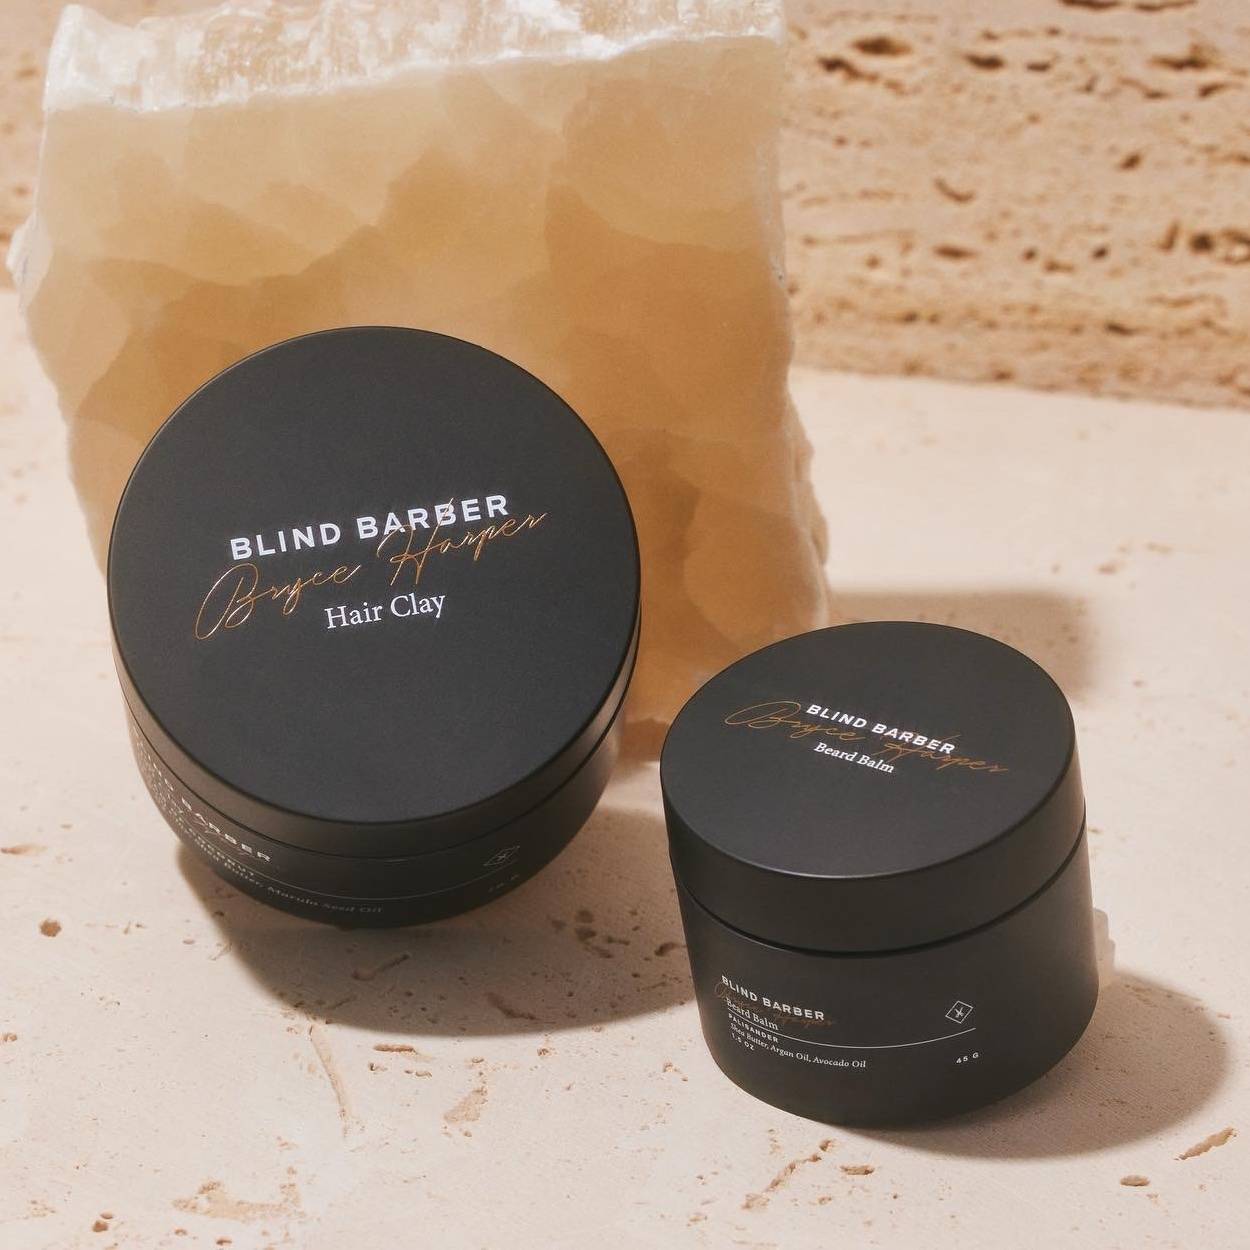 Blind Barber products